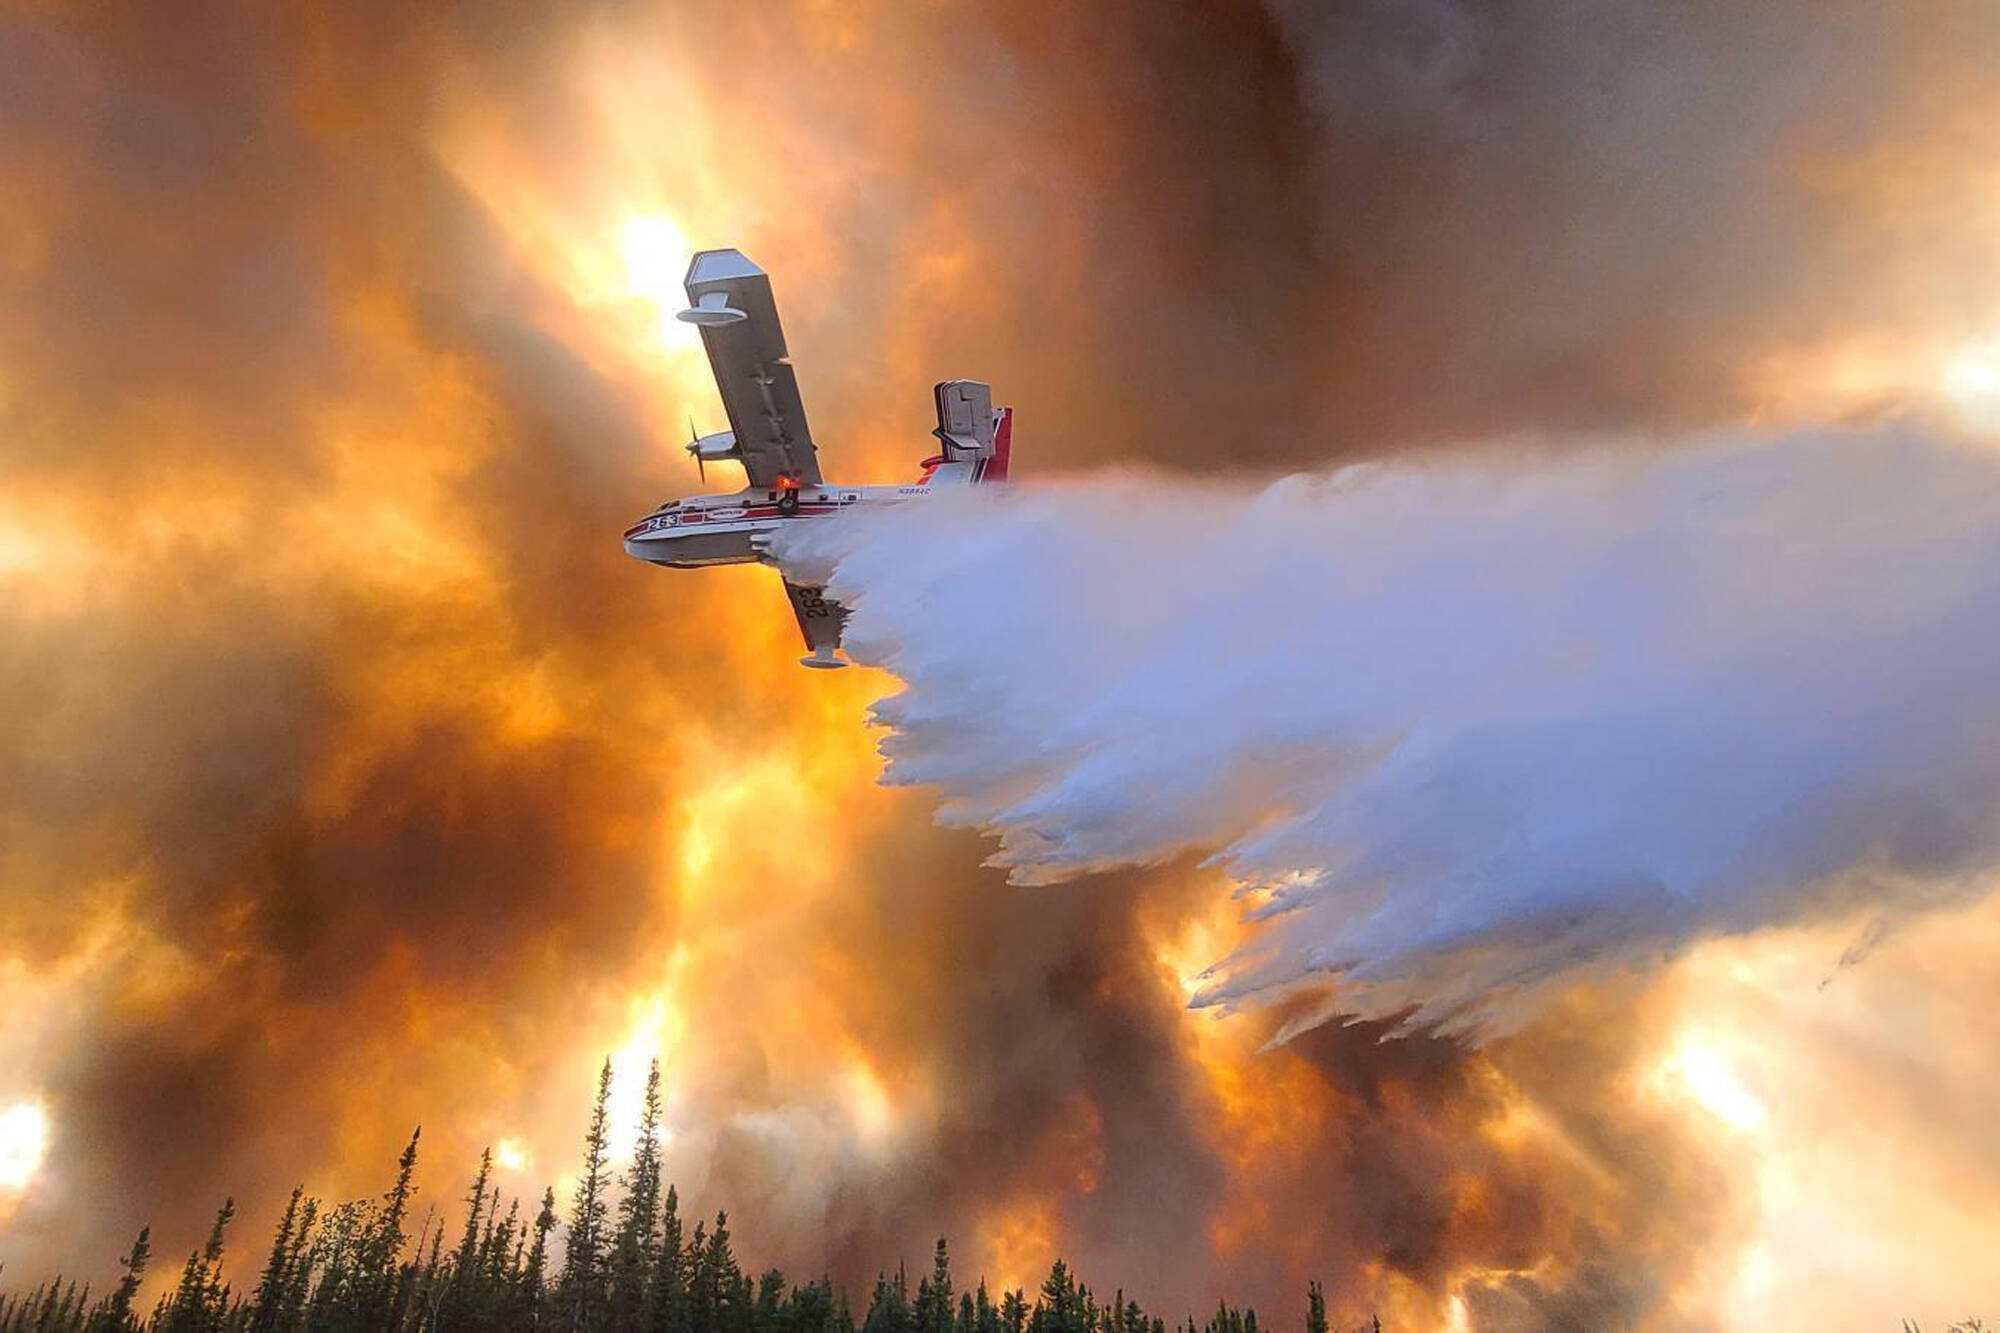 In this photo provided by Eric Kiehn, Northwest Incident Management Team 10, Alaska Division of Forestry, a fixed-wing aircraft drops water on the Clear Fire near Anderson, Alaska, on July 6, 2022. Alaska’s remarkable wildfire season includes over 530 blazes that have burned an area more than three times the size of Rhode Island, with nearly all the impacts, including dangerous breathing conditions from smoke, attributed to fires started by lightning. (Eric Kiehn, Northwest Incident Management Team 10, Alaska Division of Forestry)